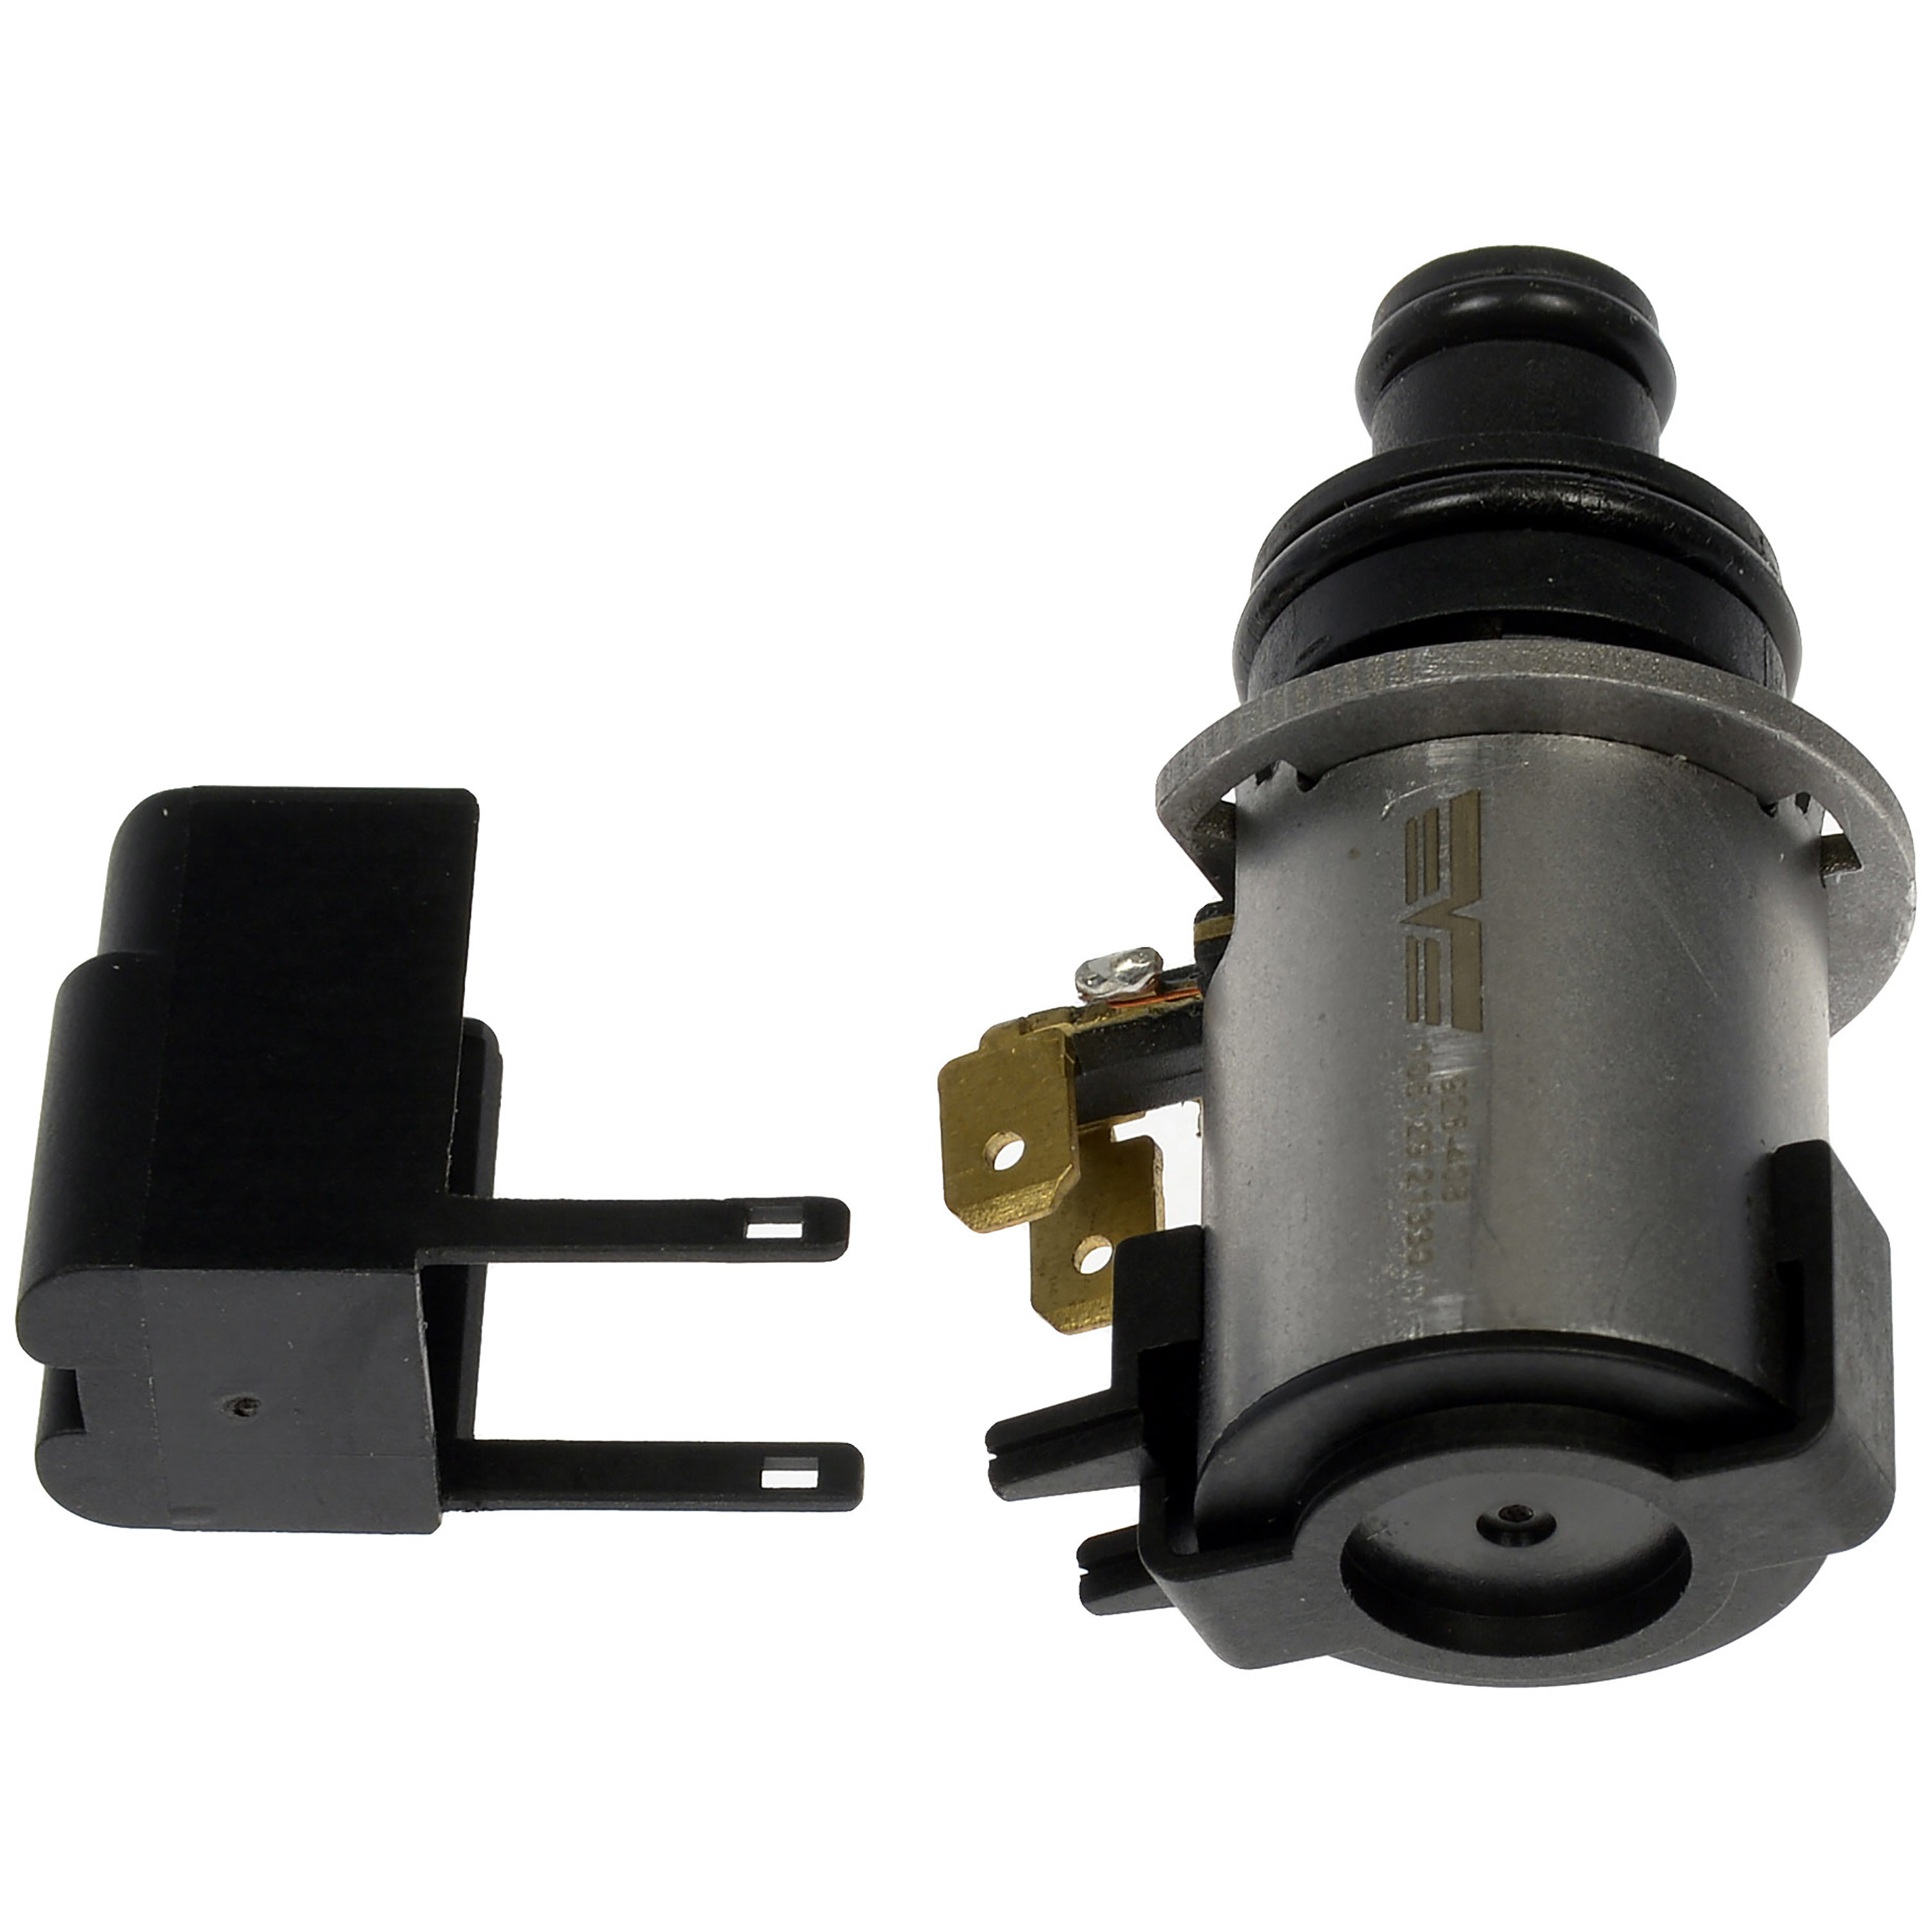 Dorman 926-408 Automatic Transmission Control Solenoid for Specific Subaru Models, Silver; Black - image 3 of 8